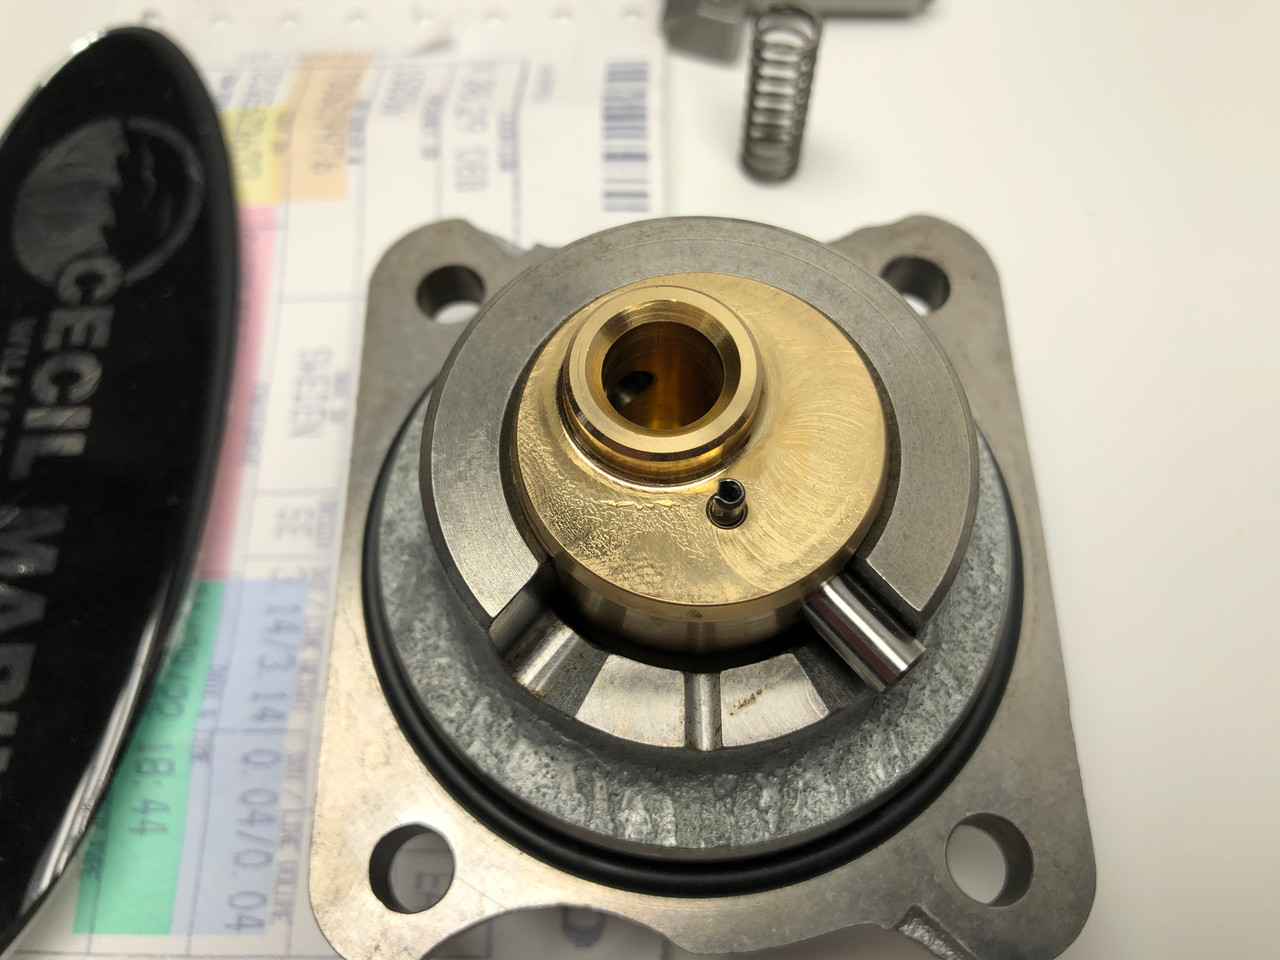 $529.99* GENUINE VOLVO no tax* SHIFT MECHANISM 21256410 *In Stock & Ready To Ship!